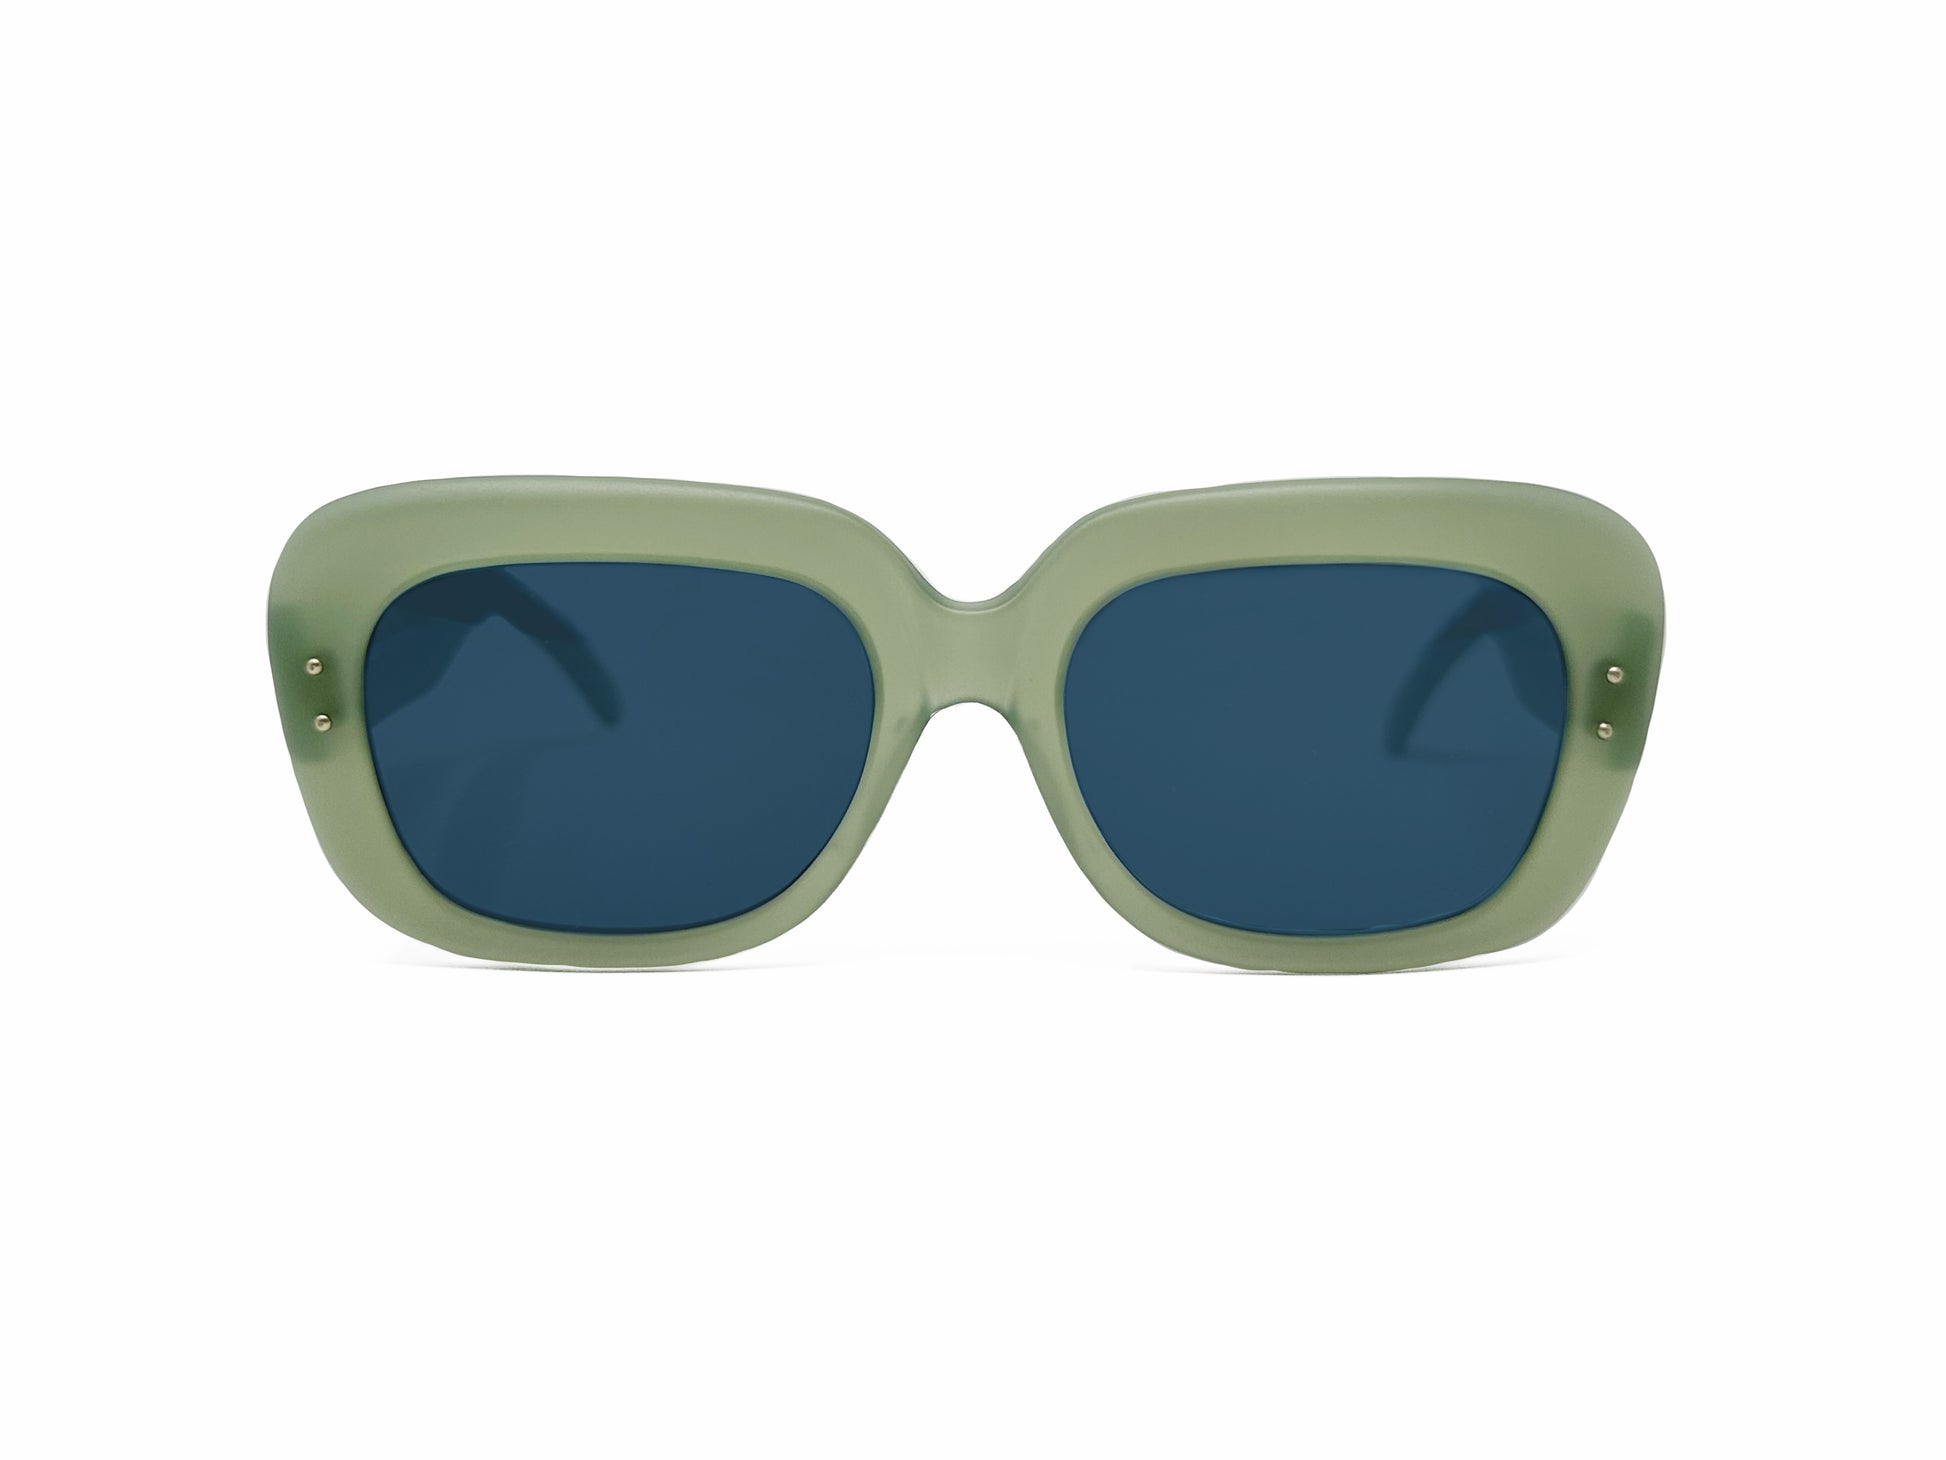 Kador rounded-square, acetate sunglasses. Model: 2. Color: M/1653 - Mint green with blue lenses. Front view. 